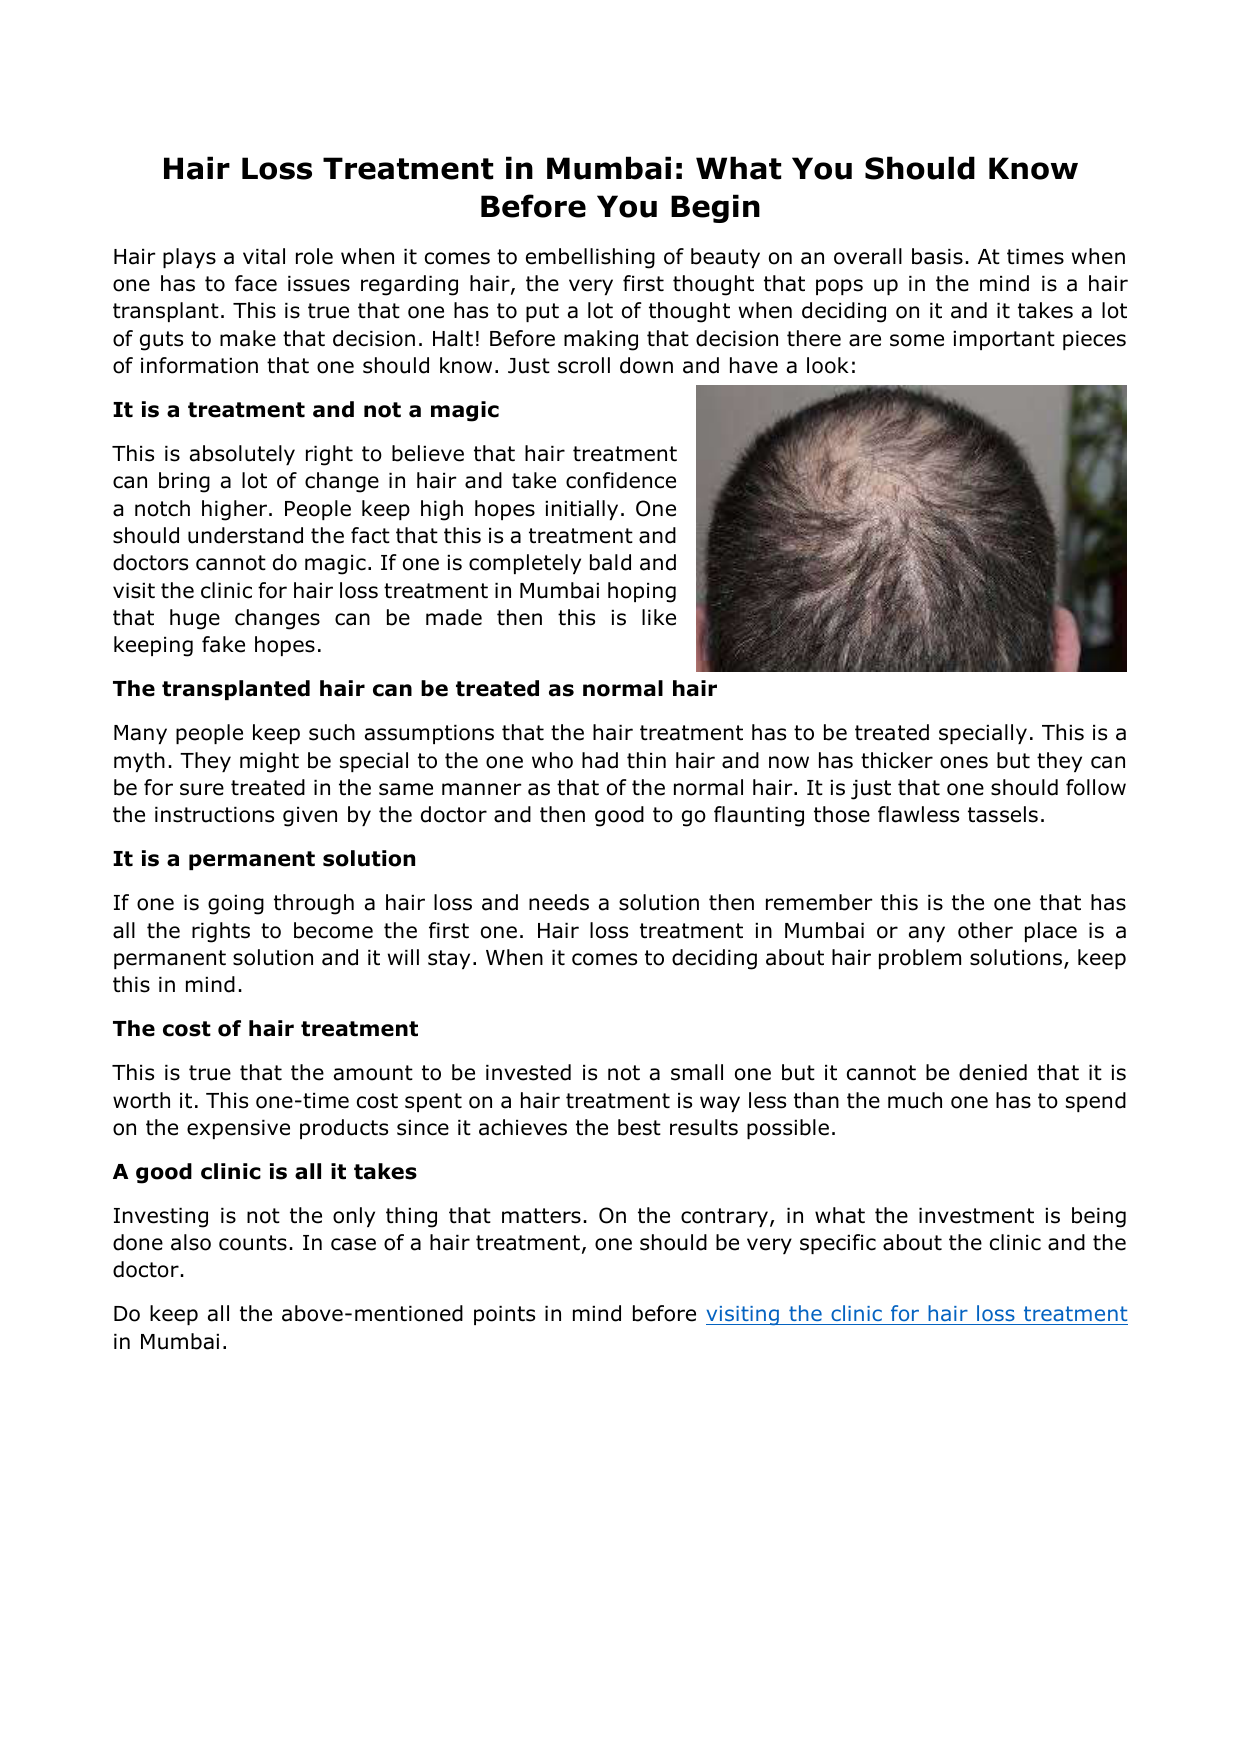 Hair Loss Treatment in Mumbai What You Should Know Before You Begin